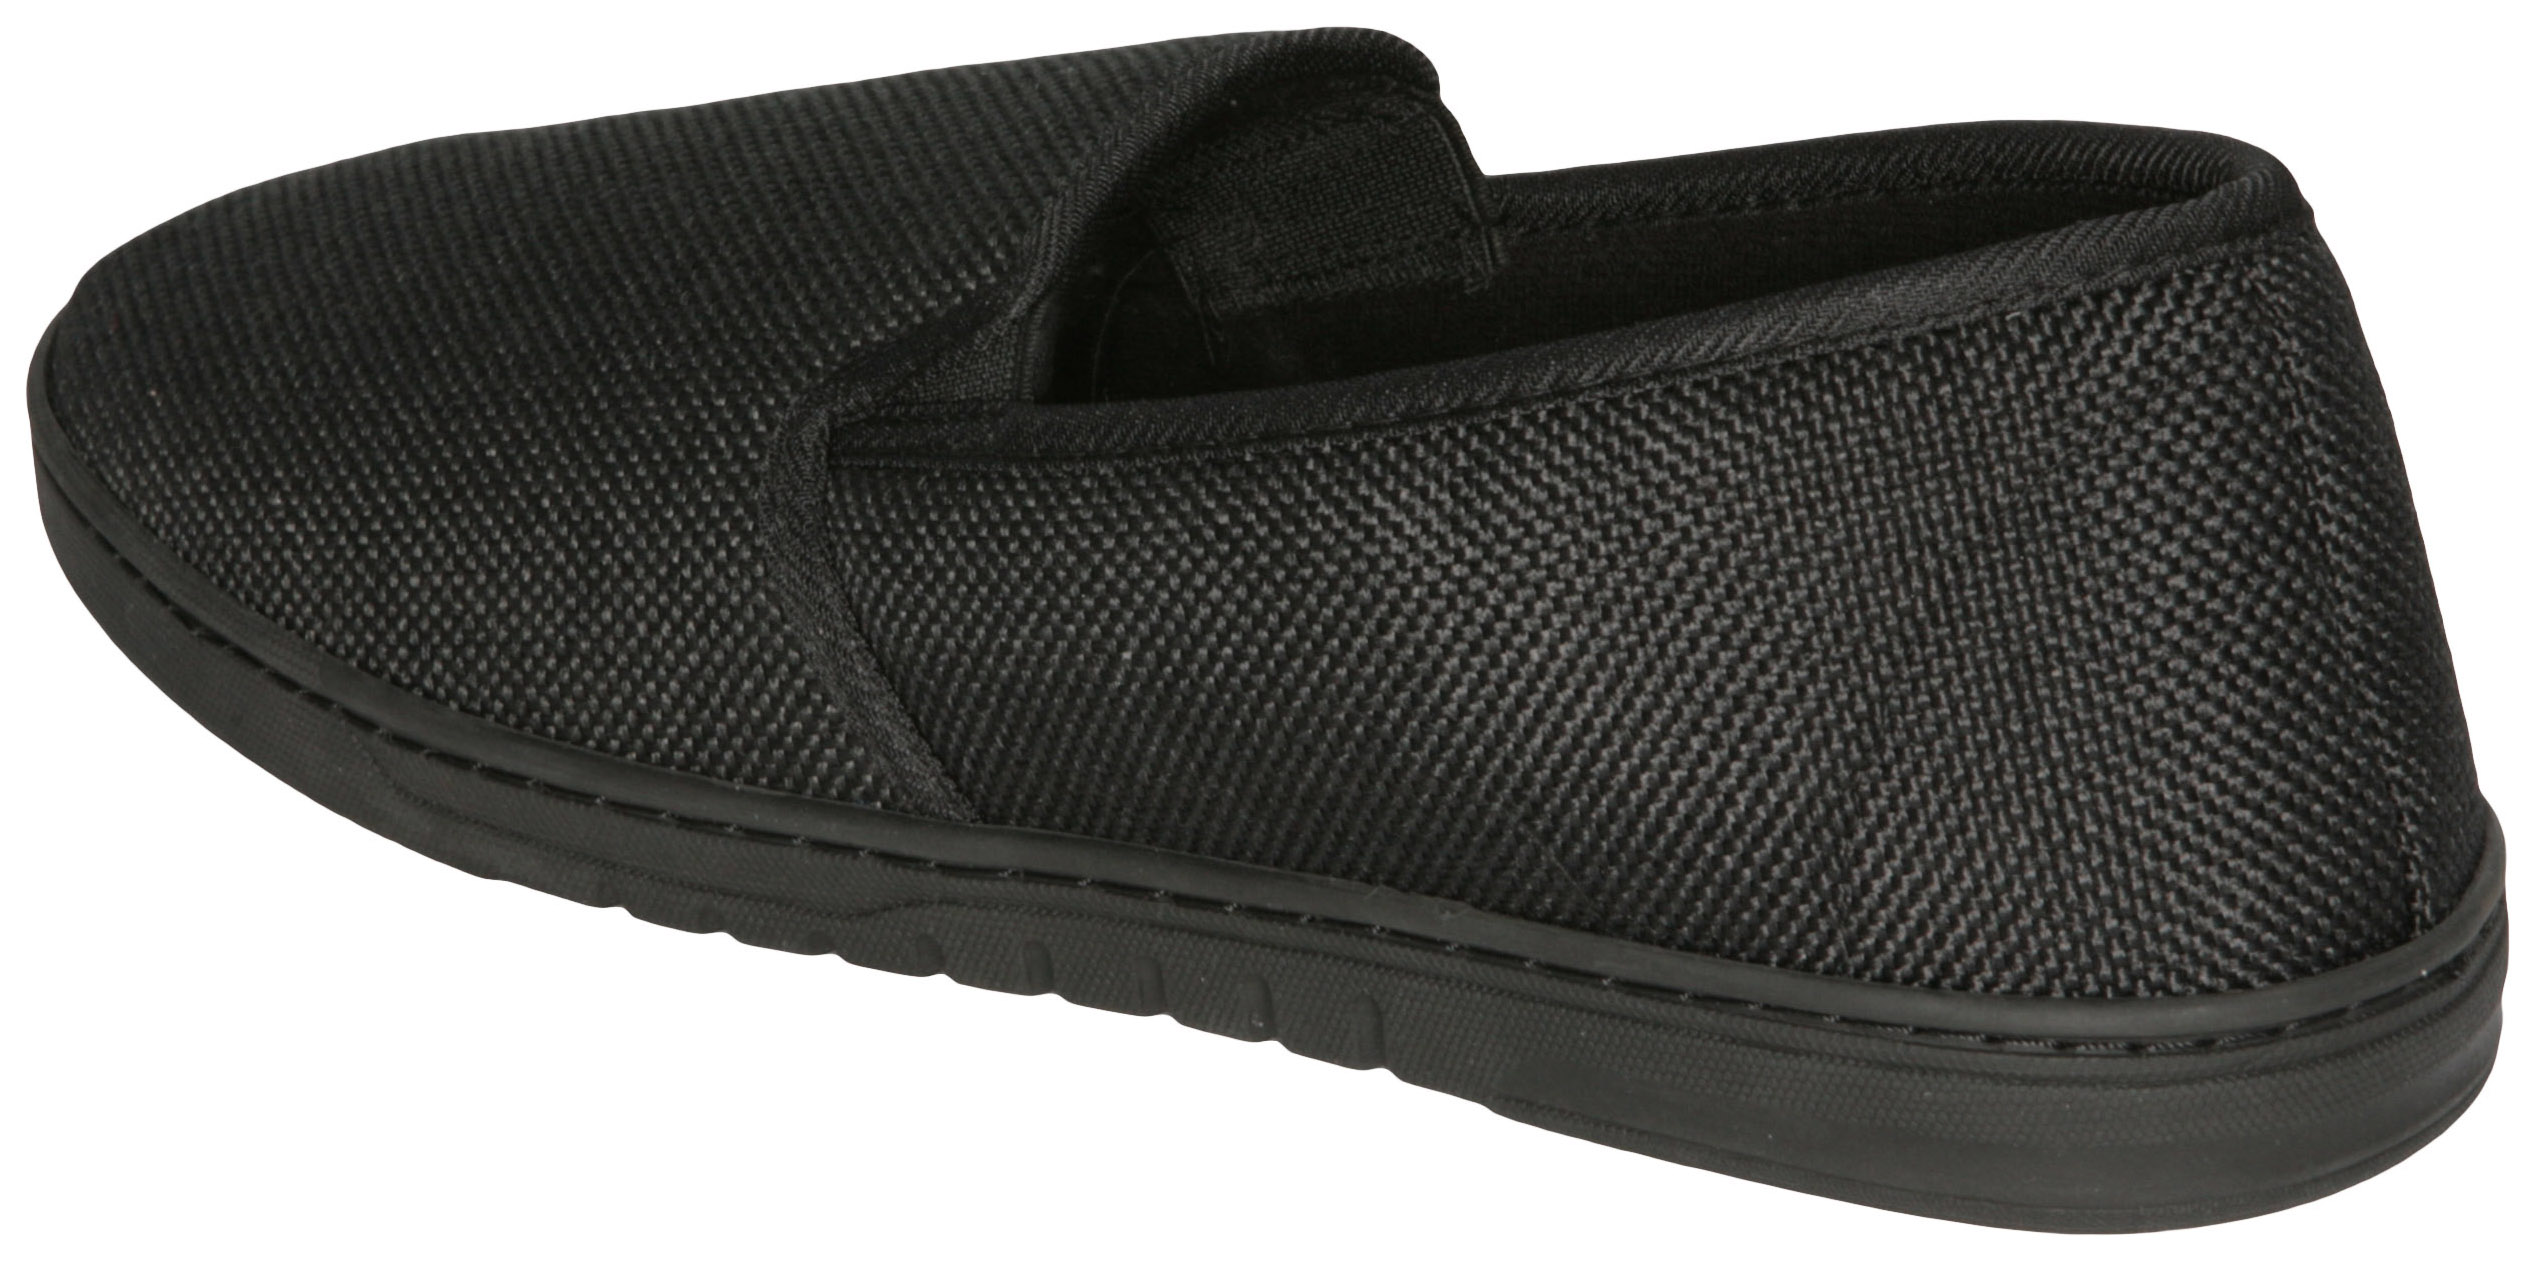 Deluxe Comfort Men's Memory Foam Slipper, Size 9-10 - Suede Vamp Checkered Lining - Memory Foam Insole - Strong TPR Outsole - Mens Slippers, Black - image 5 of 5